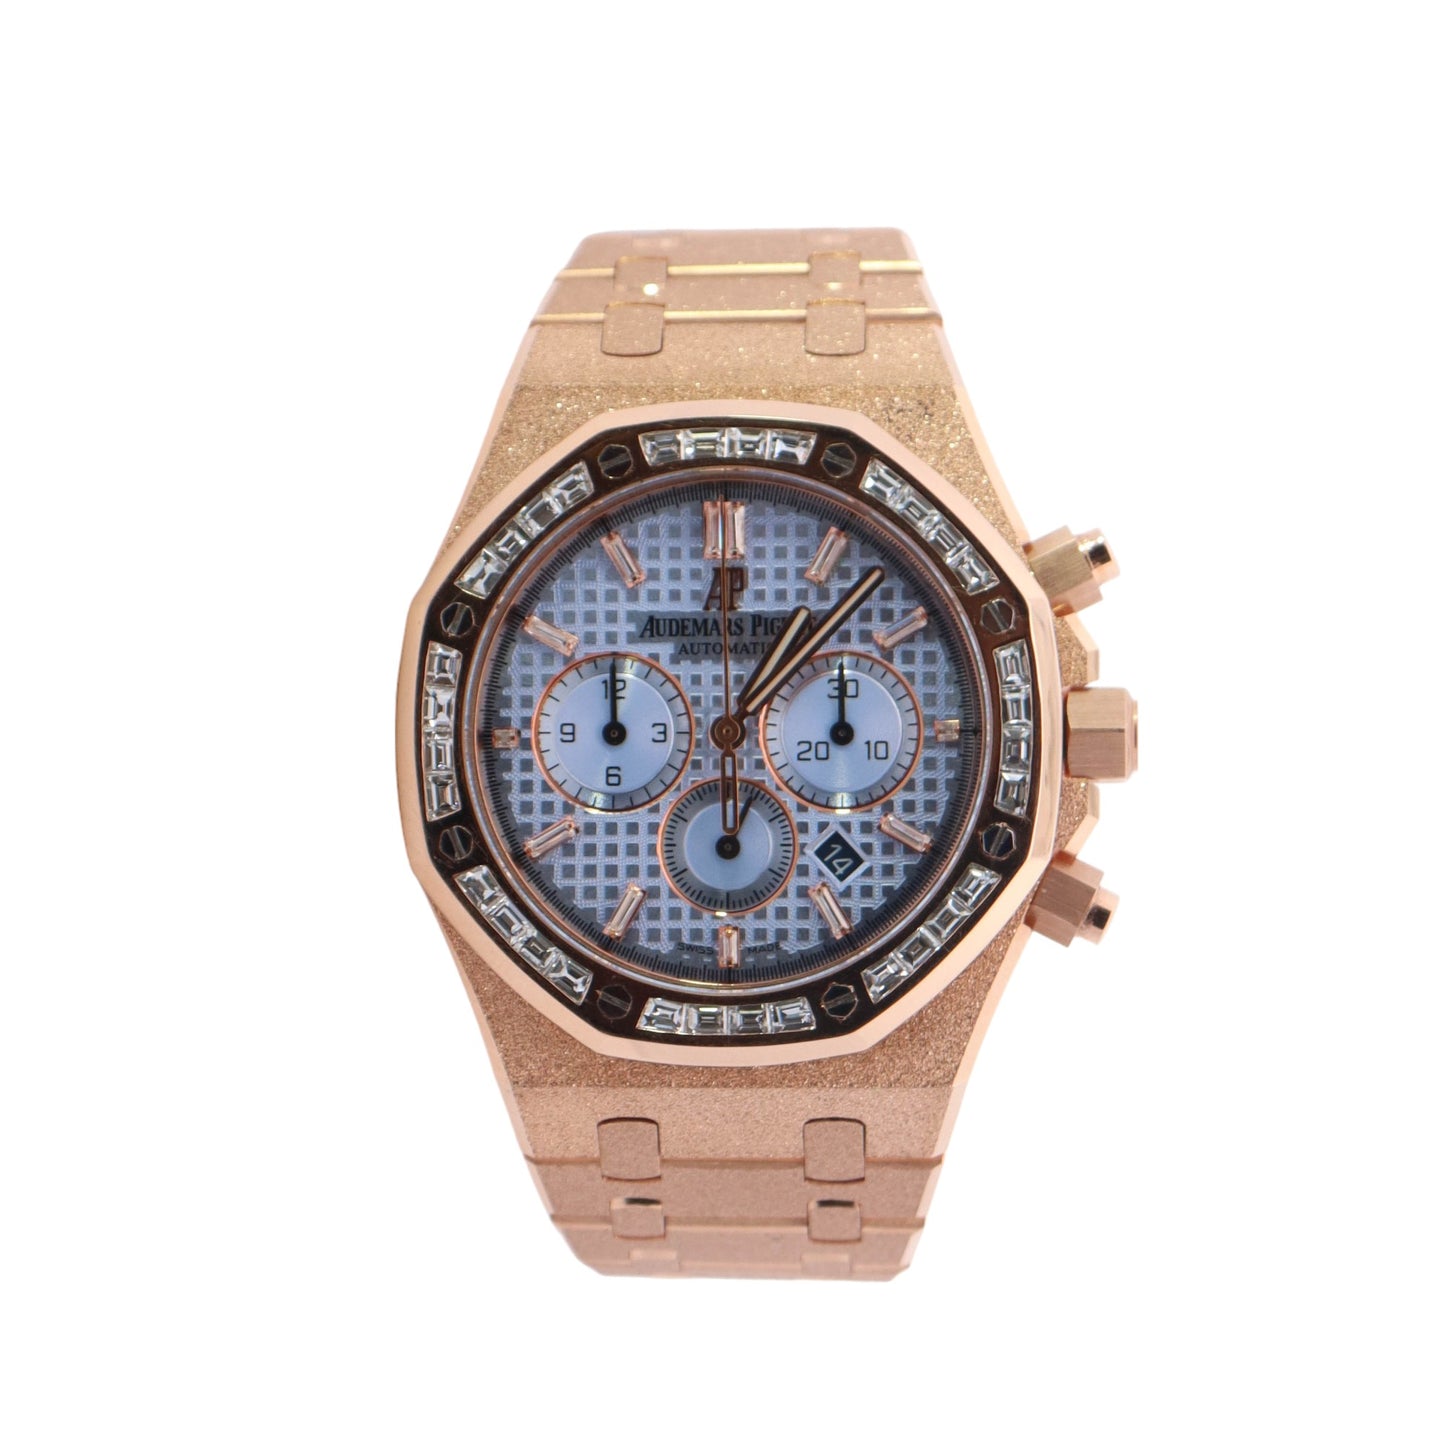 Audemars Piguet Royal Oak CUSTOM Frosted Rose Gold 41mm Baby Blue Chronograph Dial Watch - Happy Jewelers Fine Jewelry Lifetime Warranty